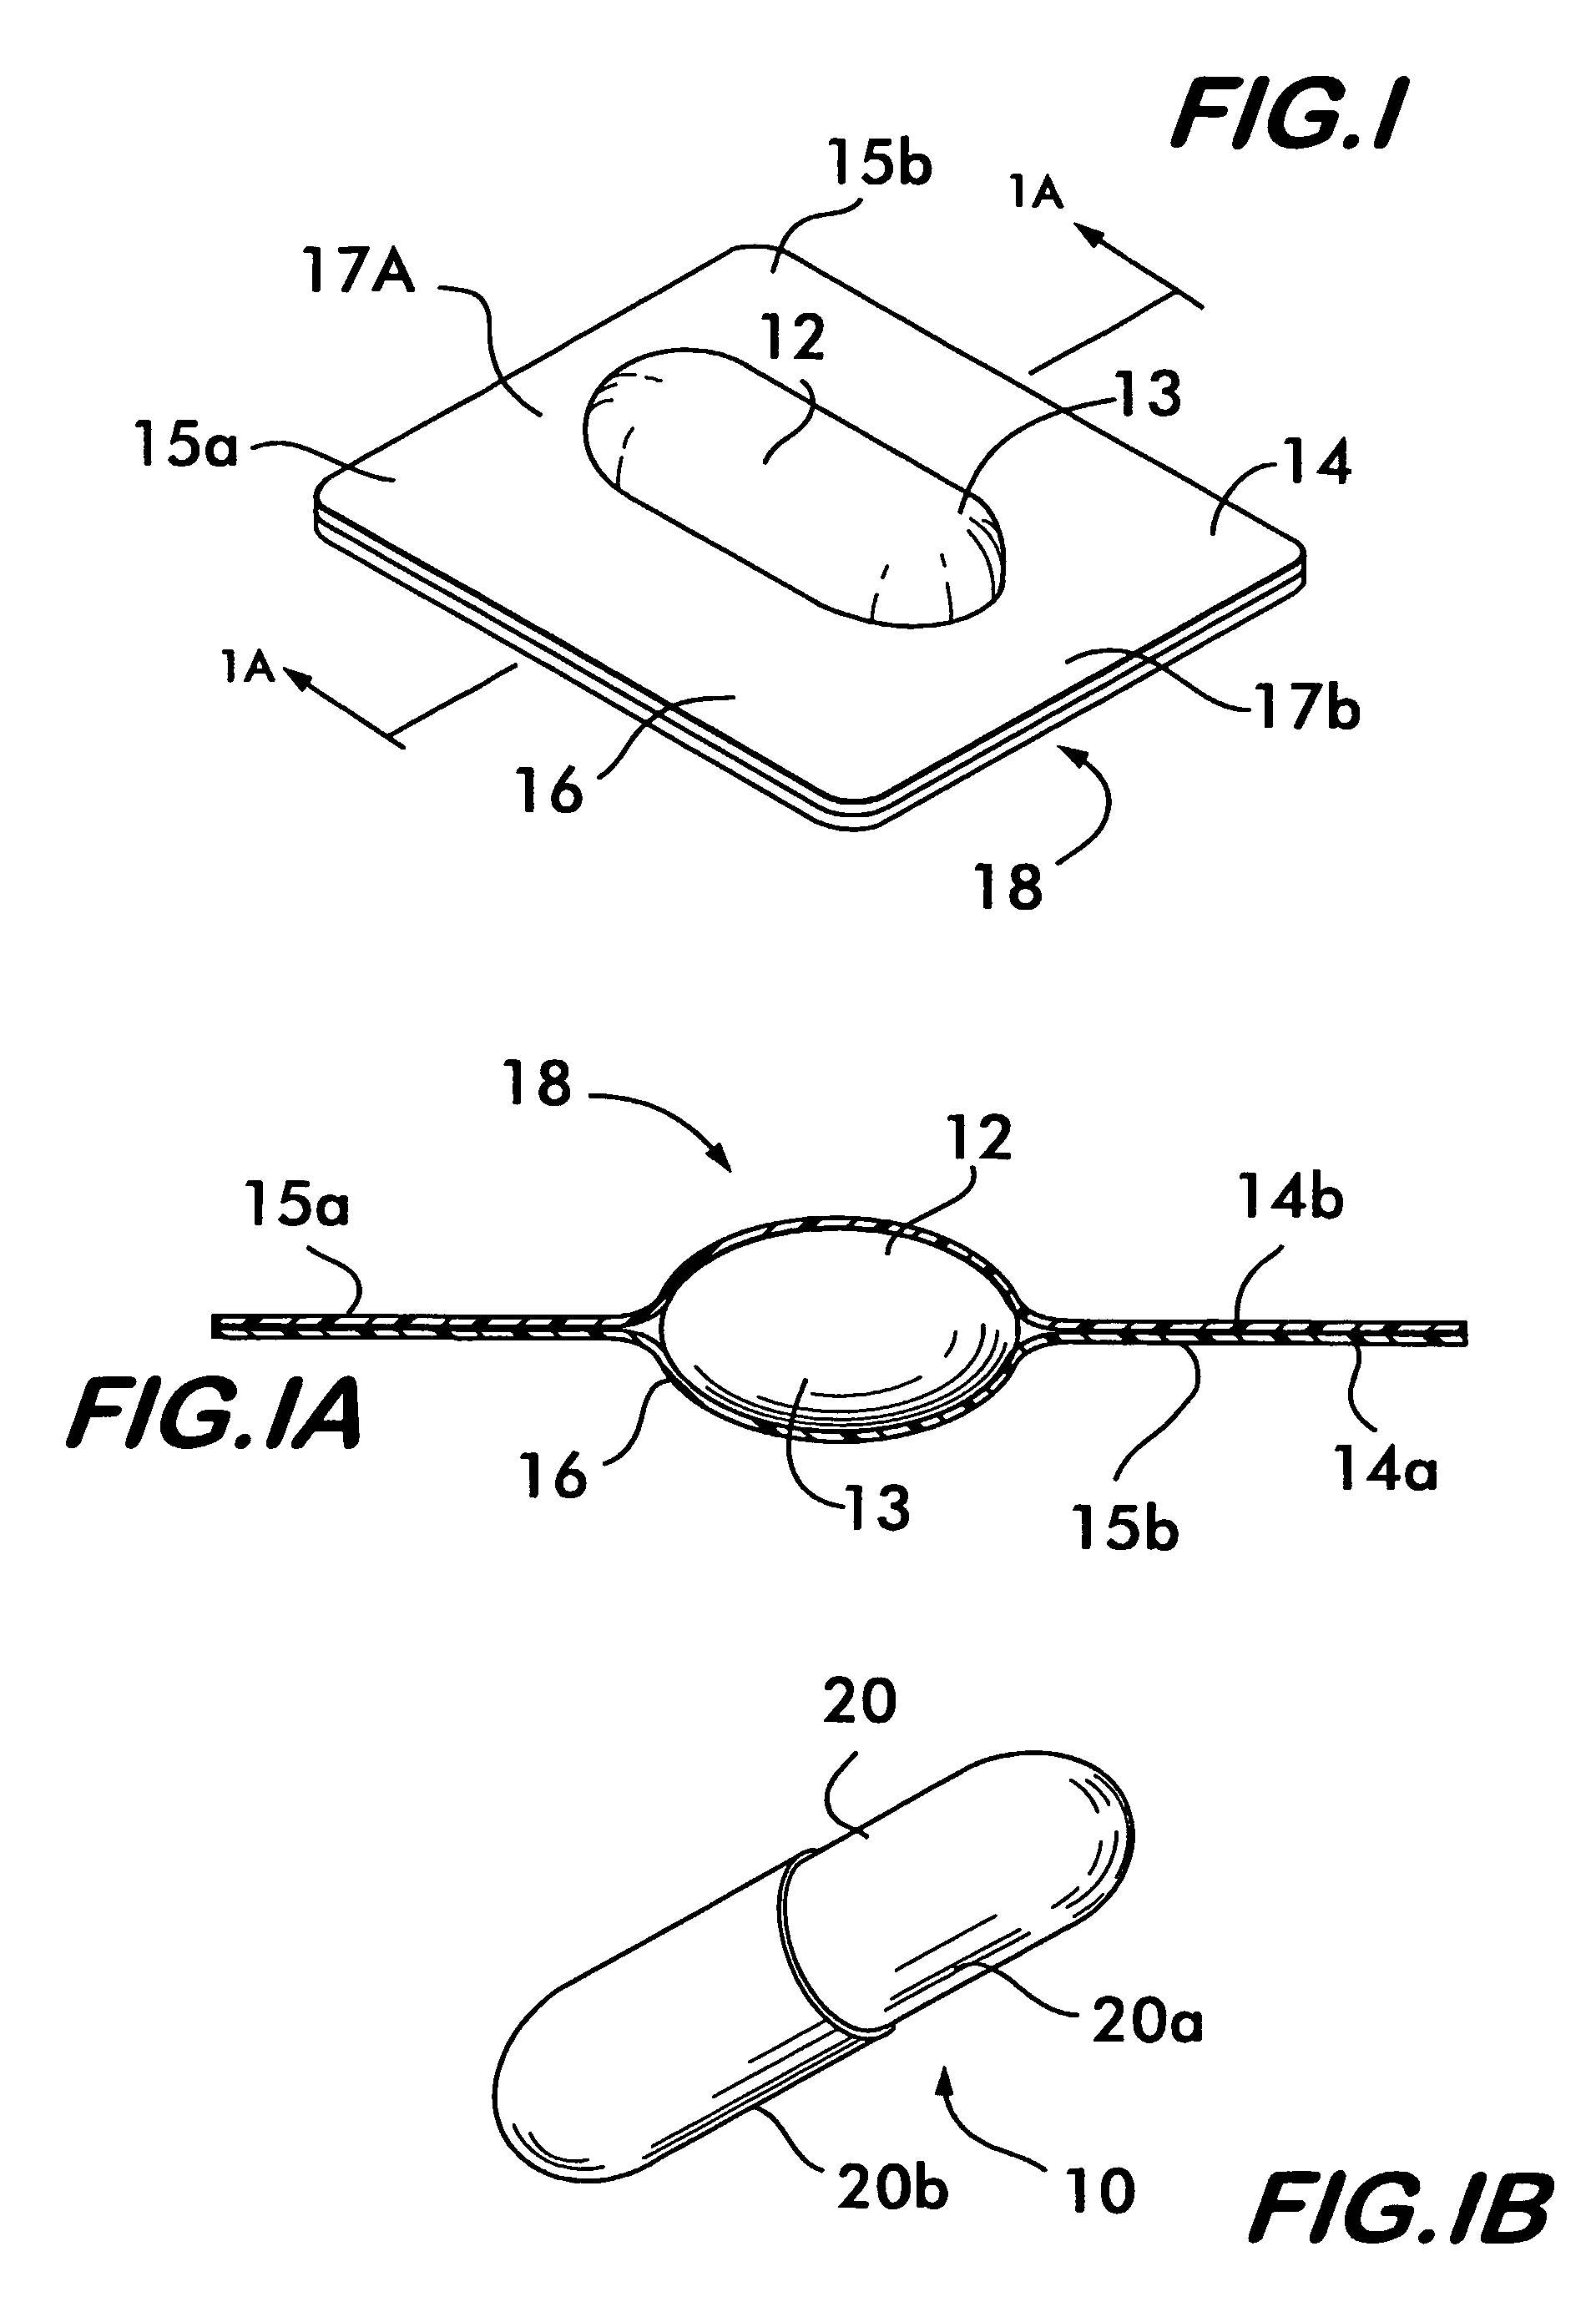 Process and machine for automated manufacture of gastro-retentive devices